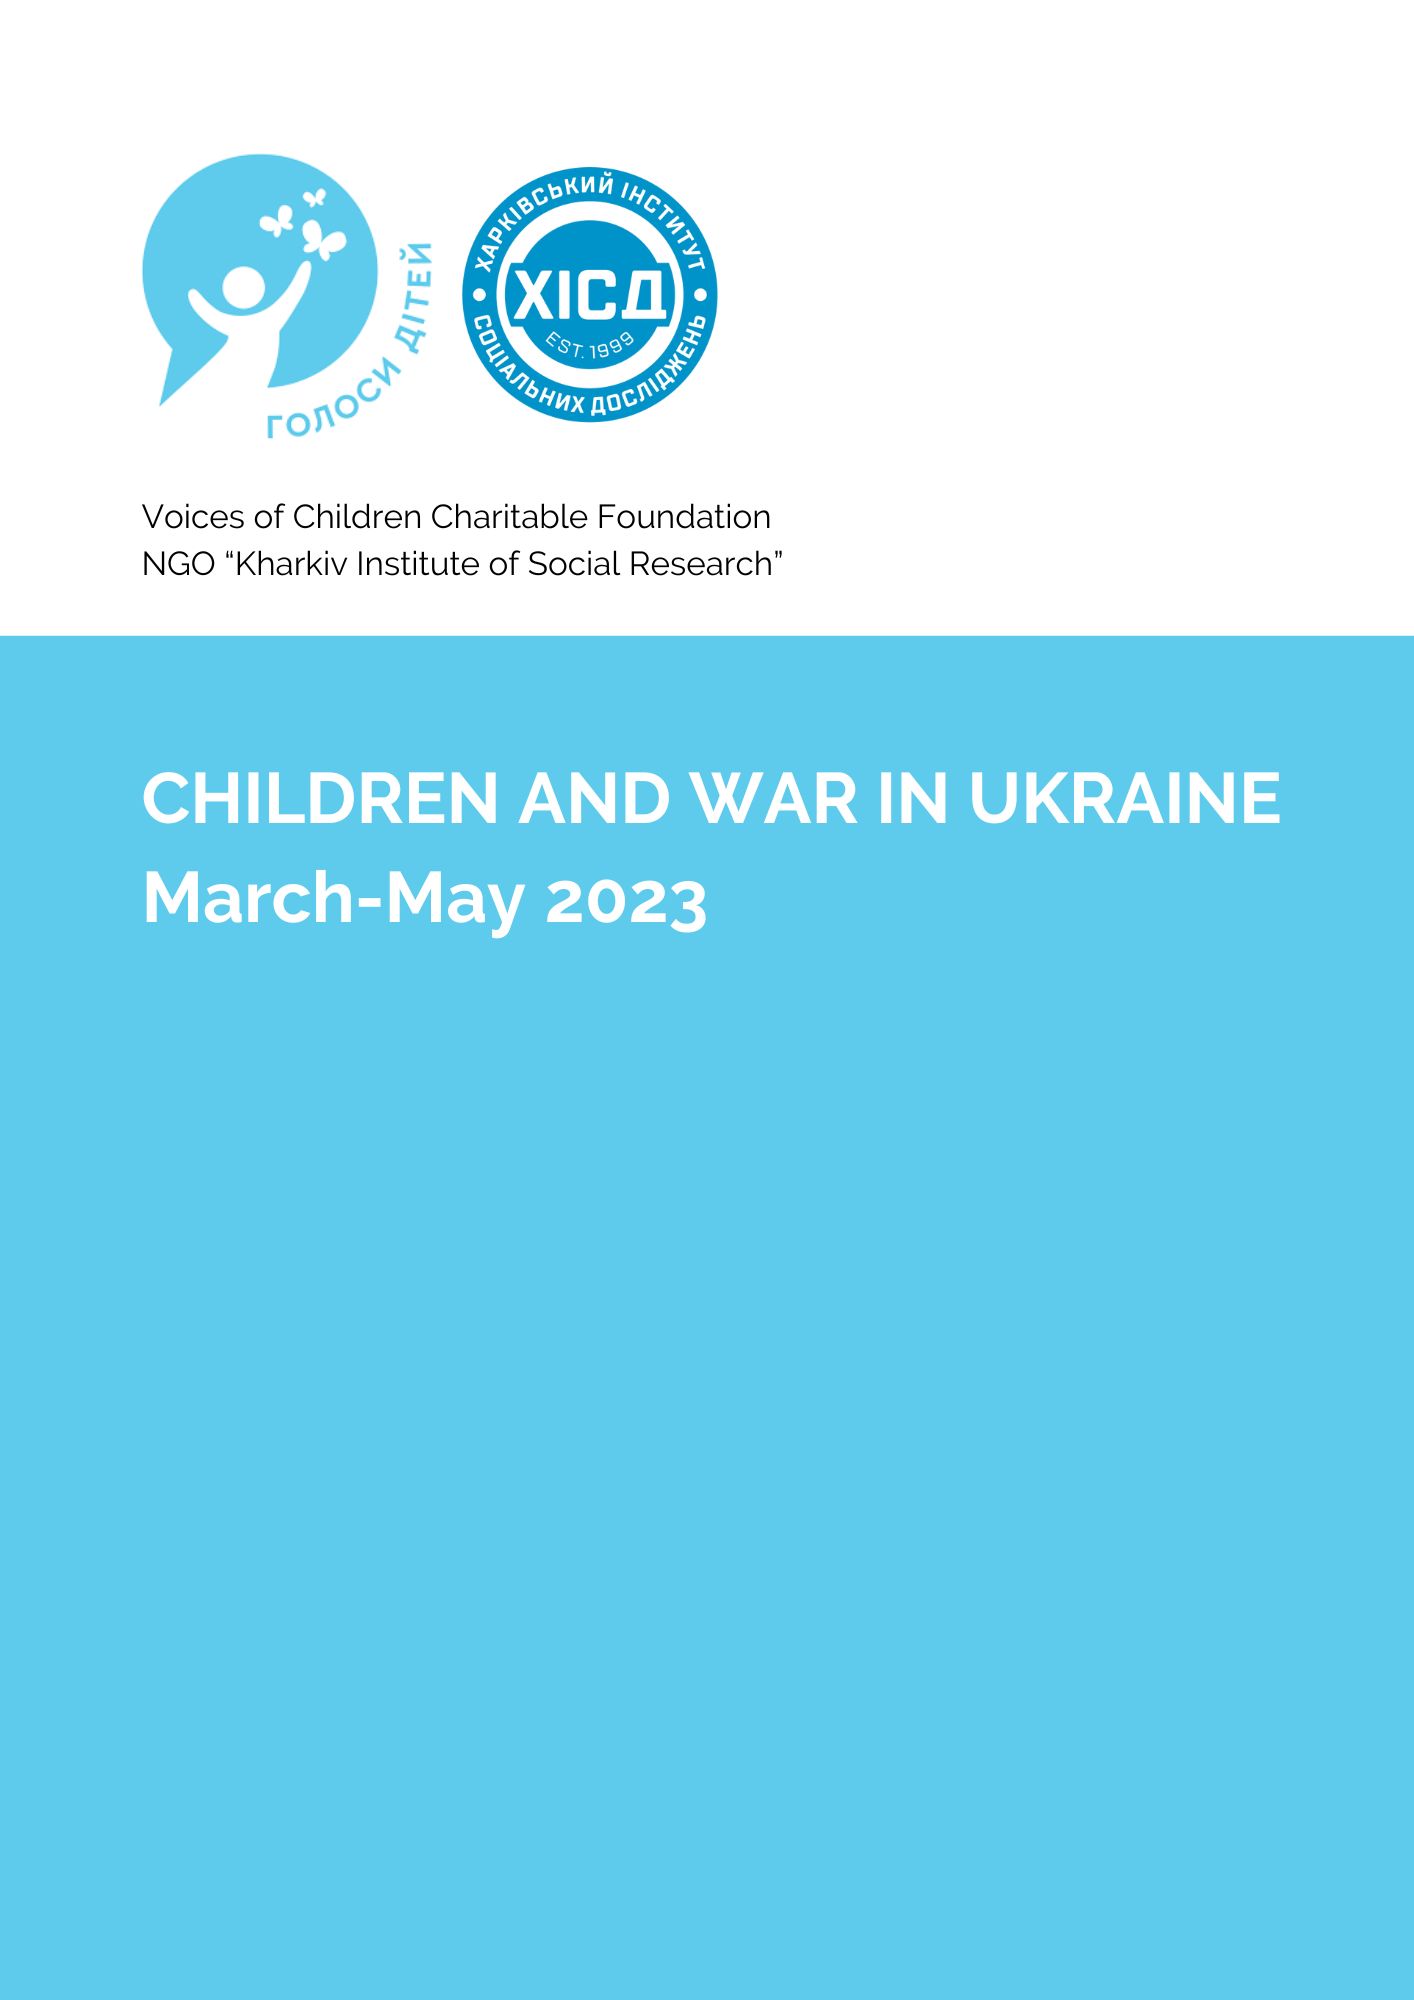 Children and war: March-May 2023